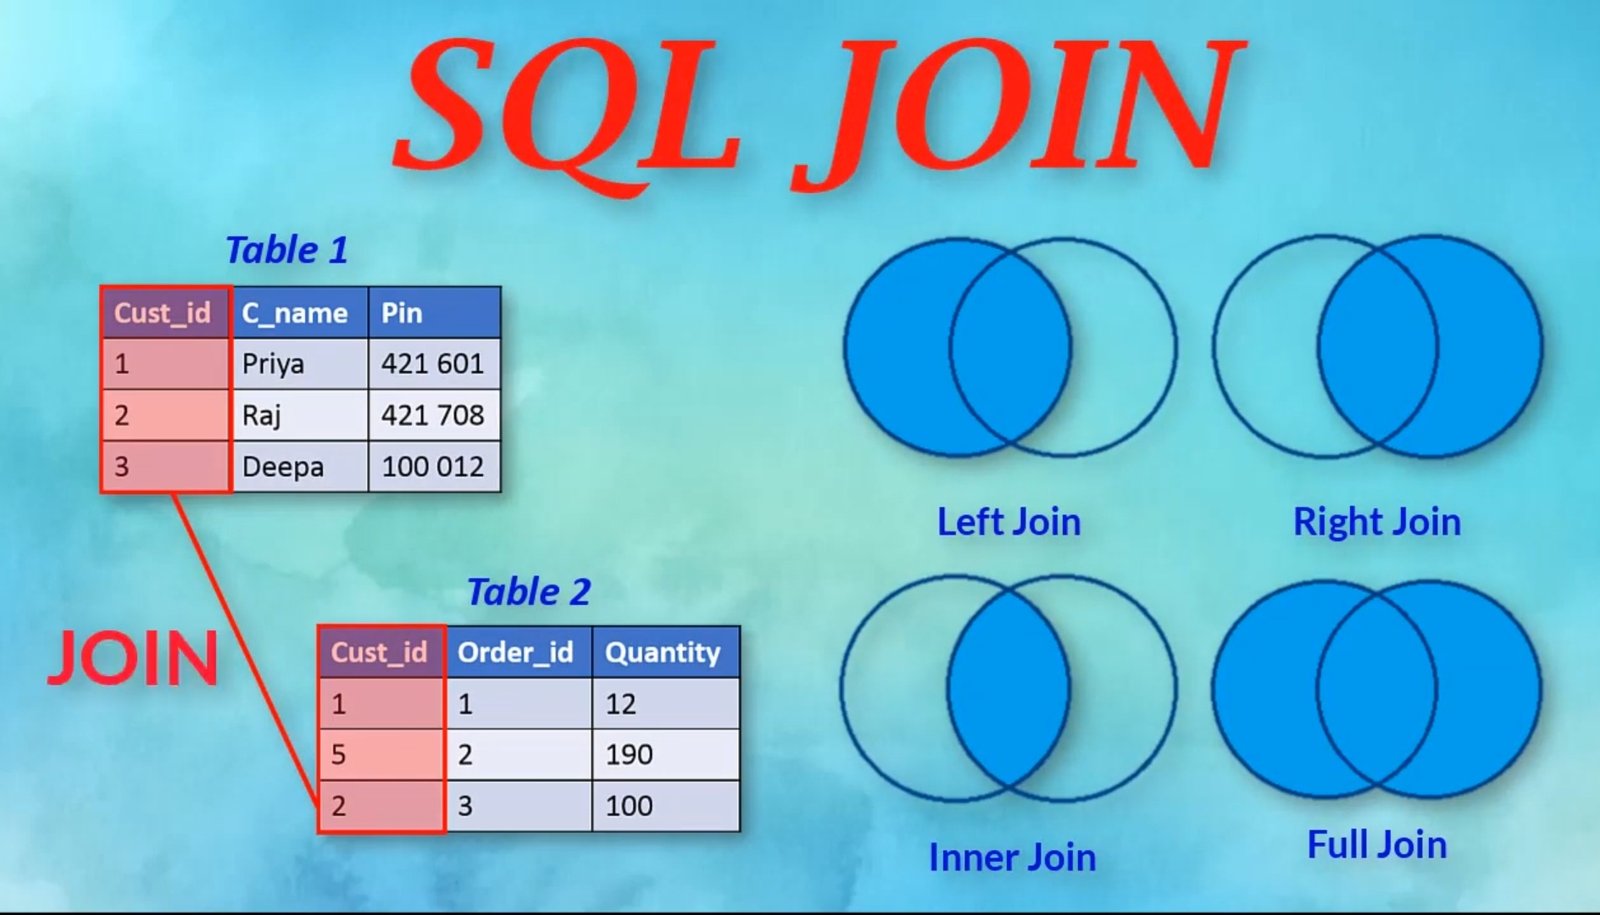 Join and see. Join SQL. Inner join SQL. Left join SQL. Join SQL картинки.